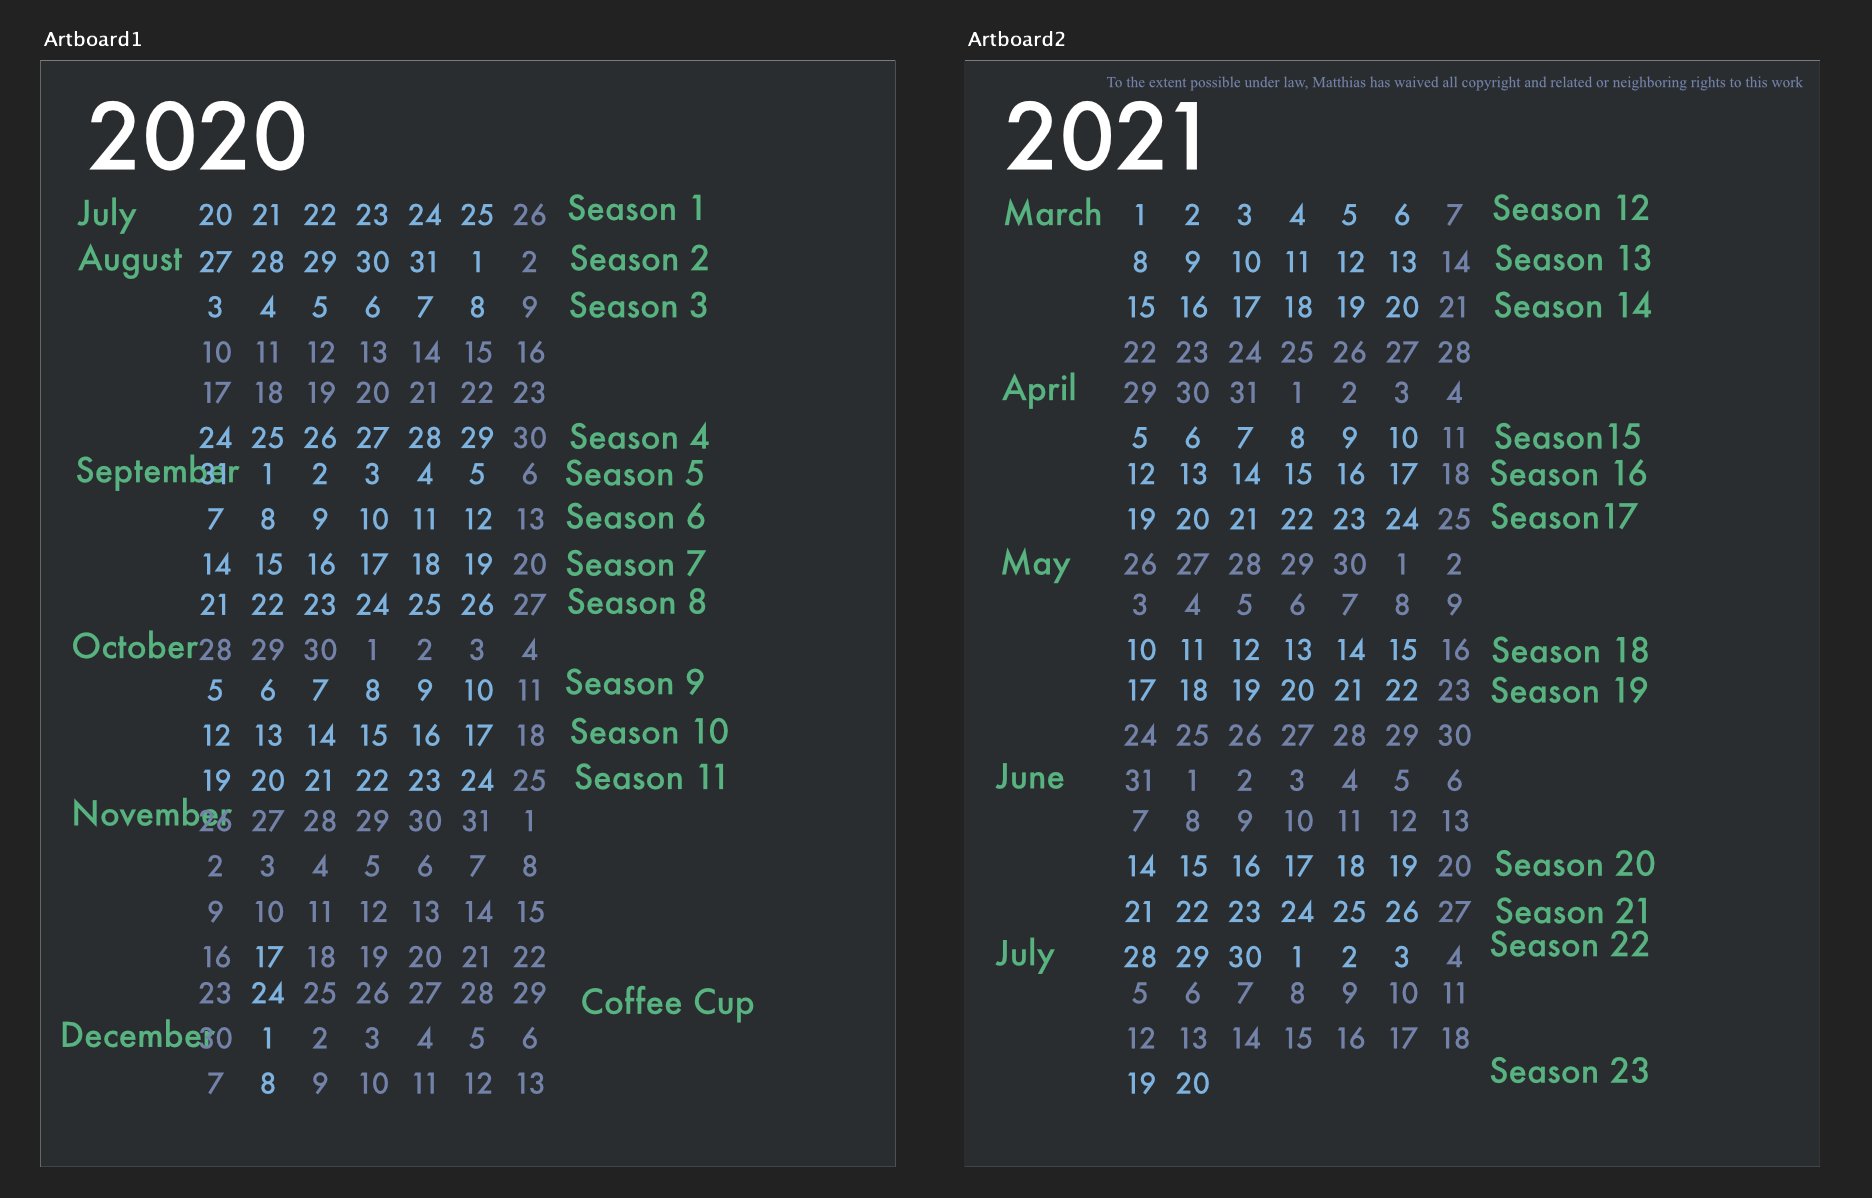 A screenshot of artboards showing a calandar from July 20, 2020 to July 20, 2021, with dates that Blaseball games happened highlighted in blue, and Blaseball seasons (1-23) numbered in the margins. A fair amount of the text overlaps itself.